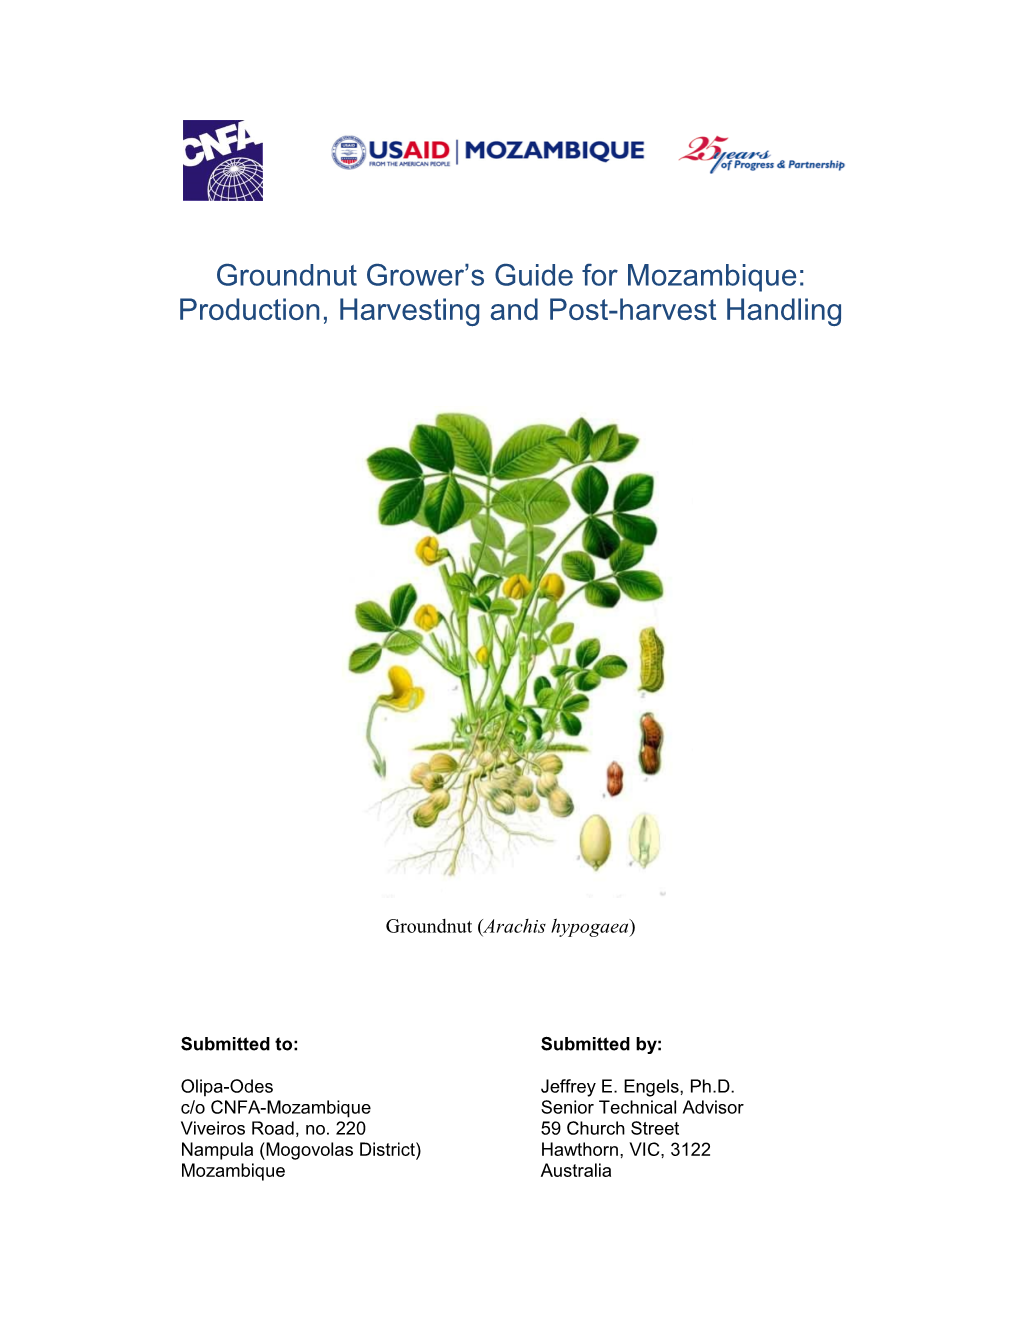 Groundnut Grower's Guide for Mozambique: Production